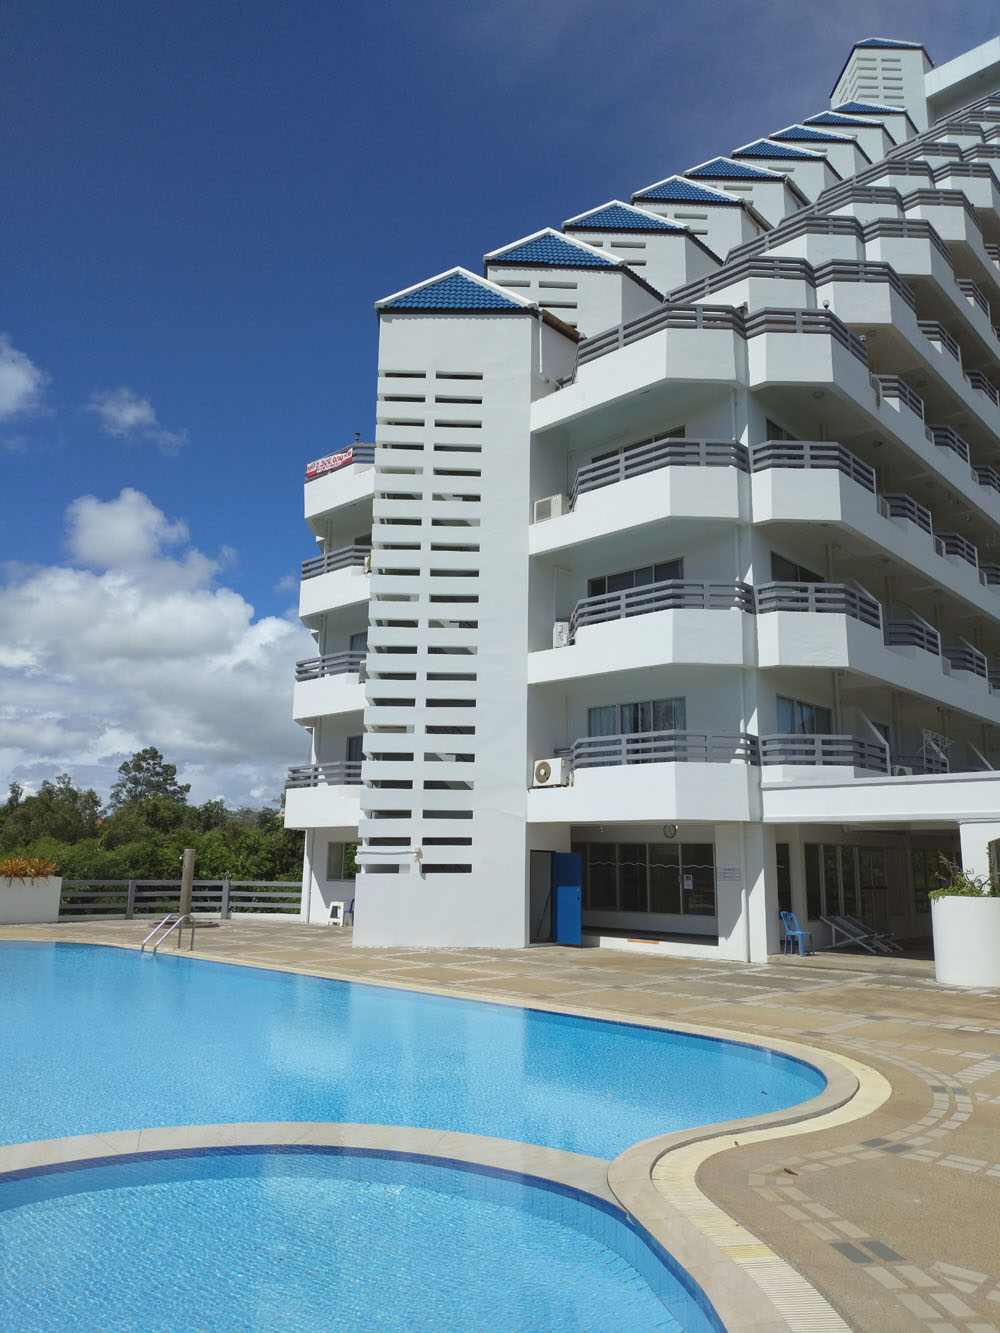 Apartment 84/352. Middle PLUS class apartment in  Rayong Condo Chain, Rayong , Thailand - Thaibaht.biz